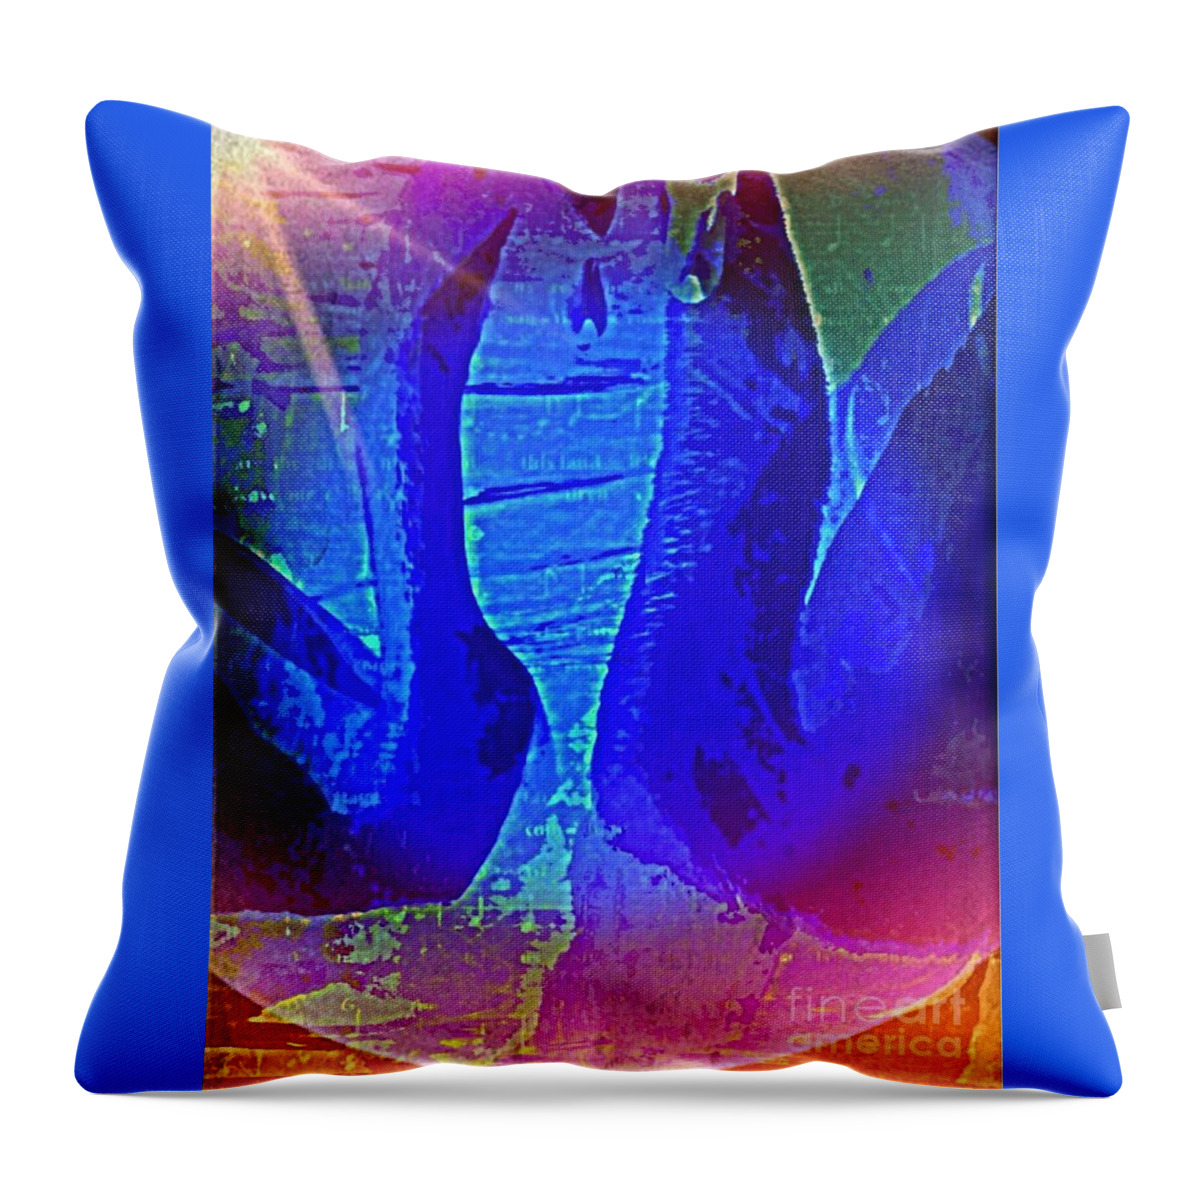  Throw Pillow featuring the digital art Swan song by Christine Paris